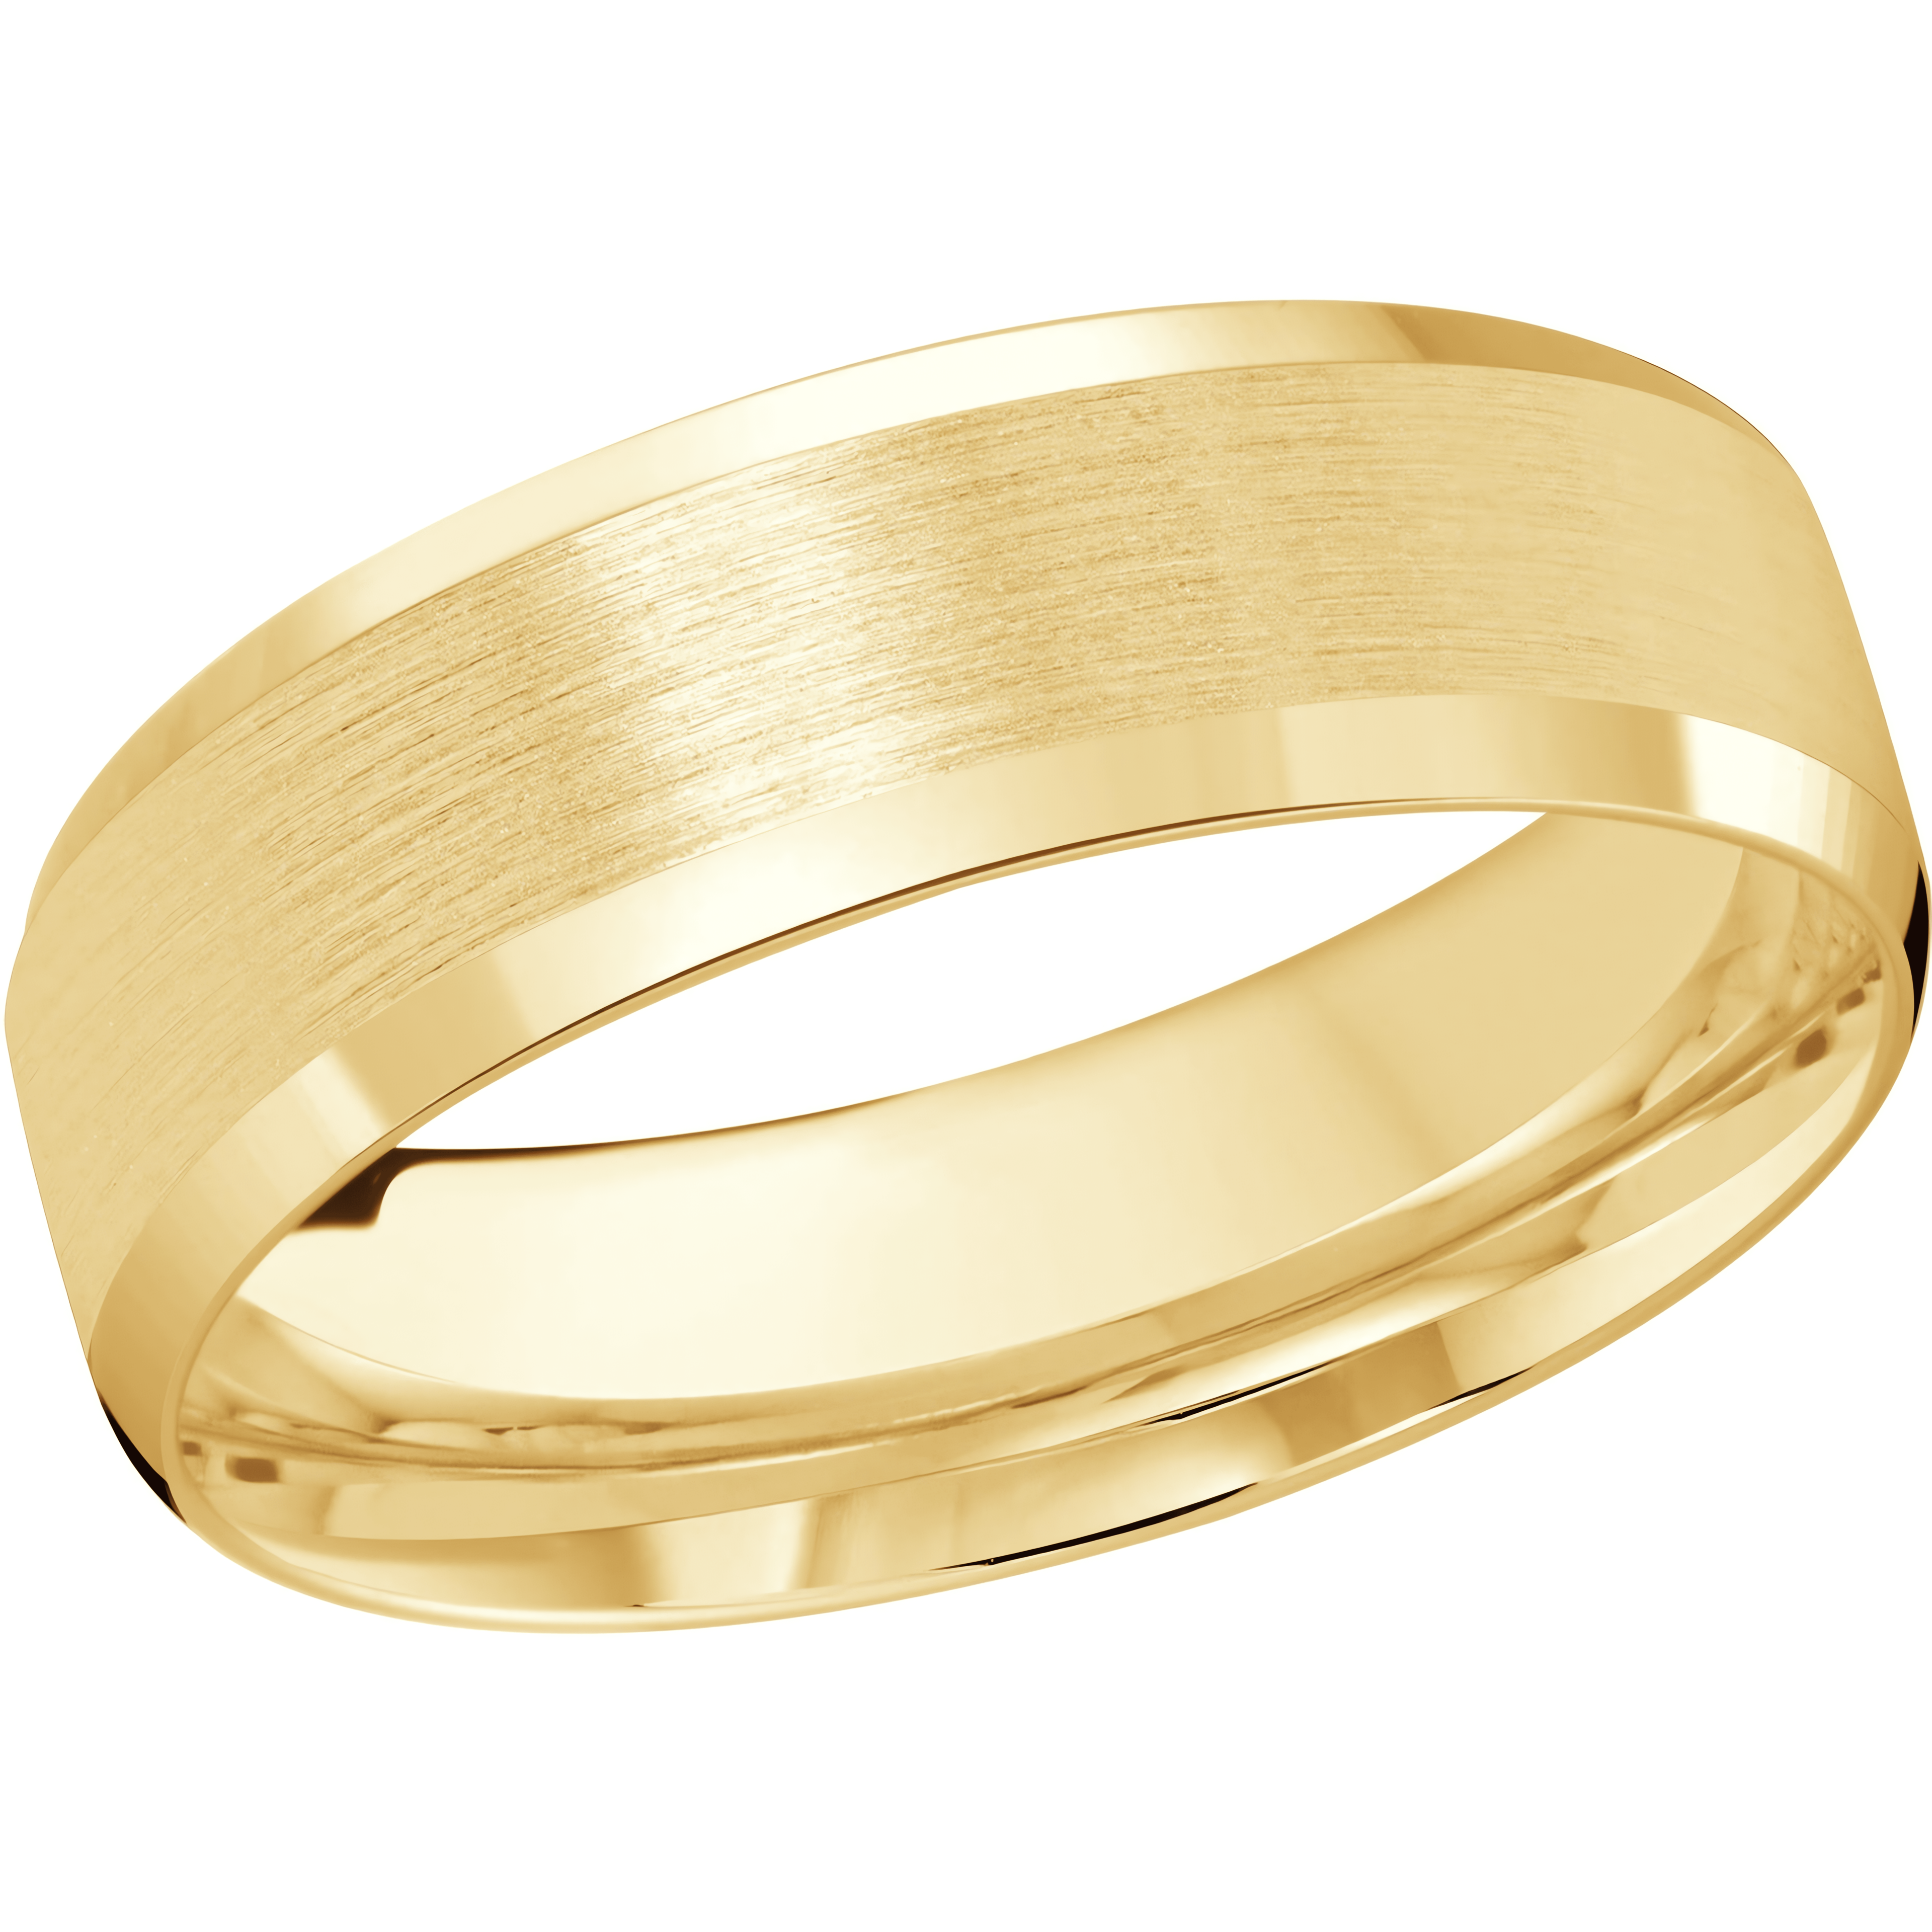 18kt yellow gold / 7 mm / top